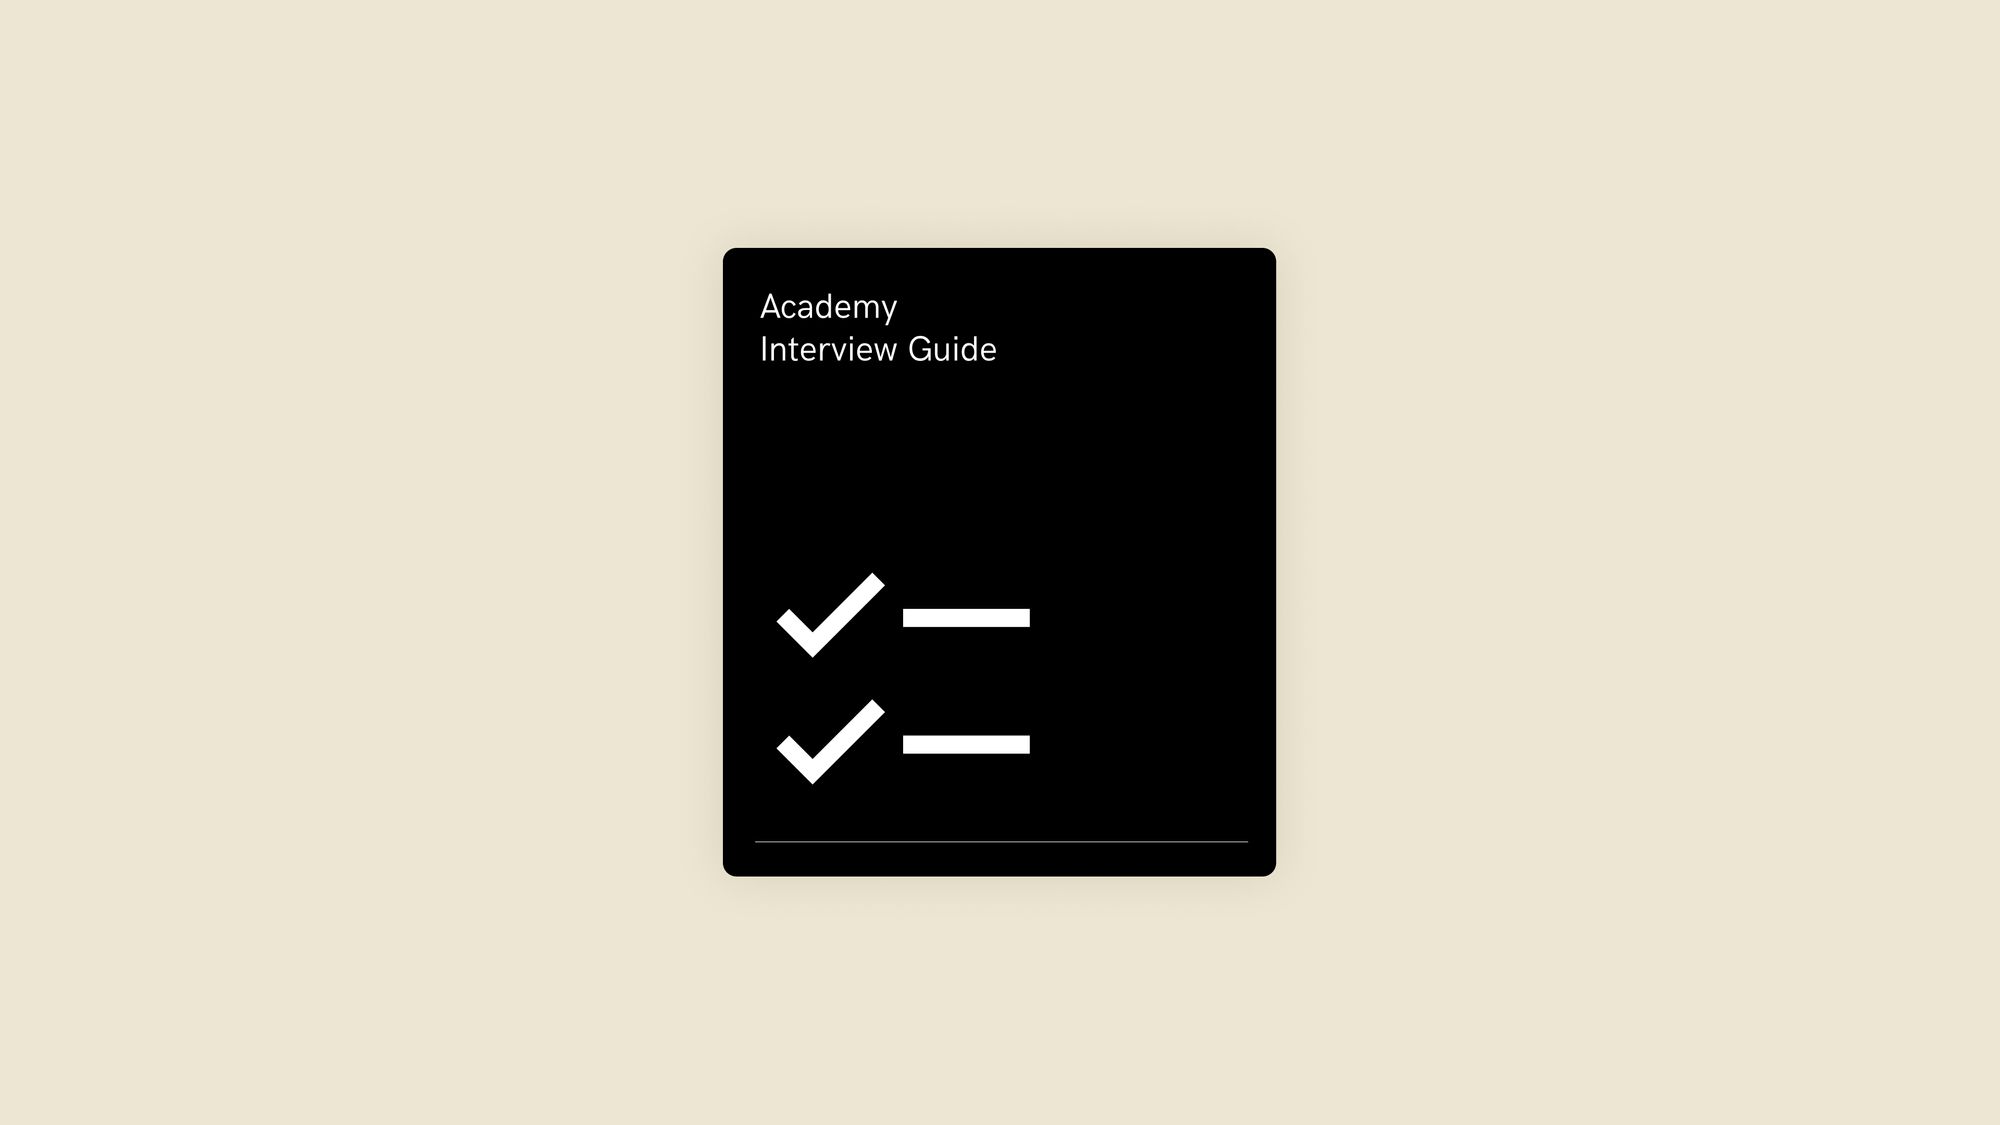 An Image of a guidebook for interviews